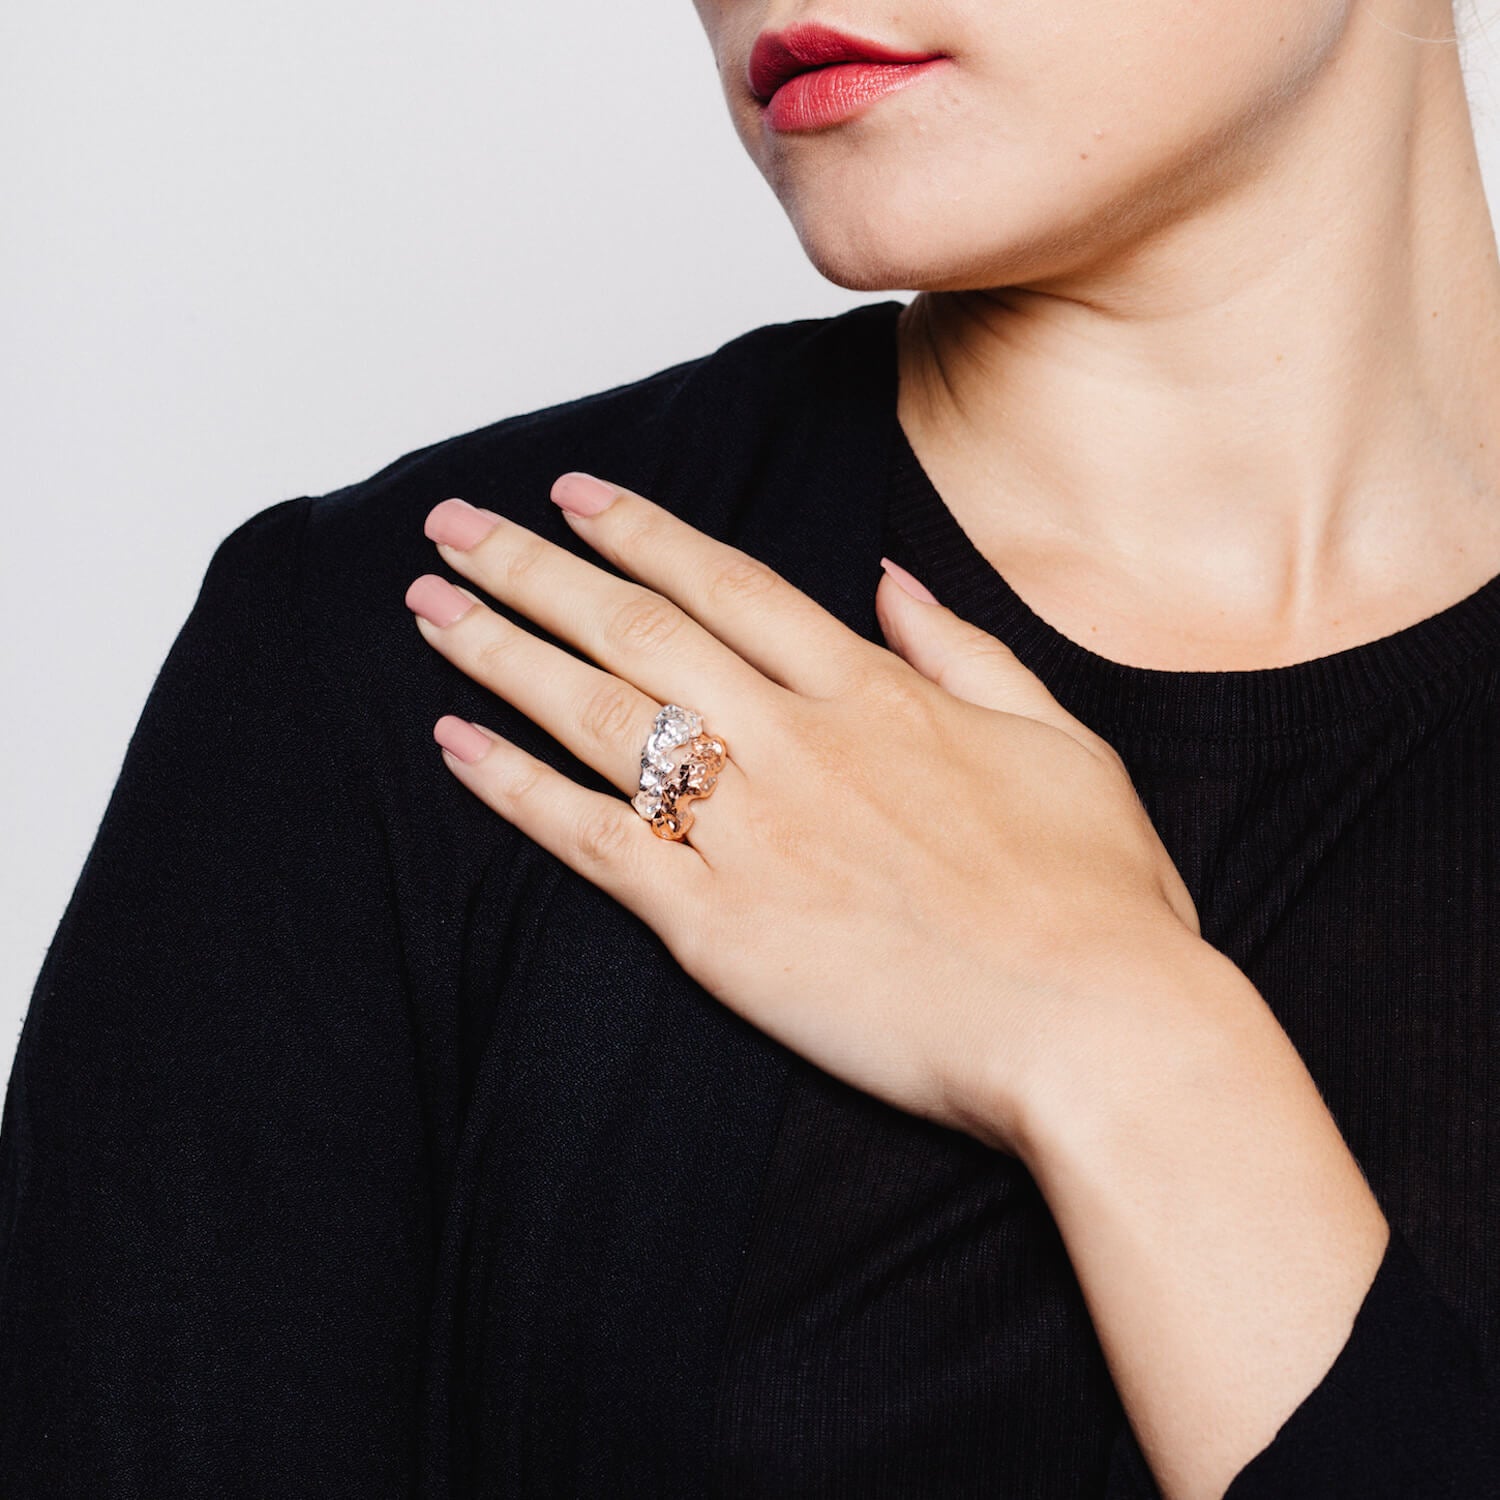 Model wearing two textured rings, one in silver and one in rose gold